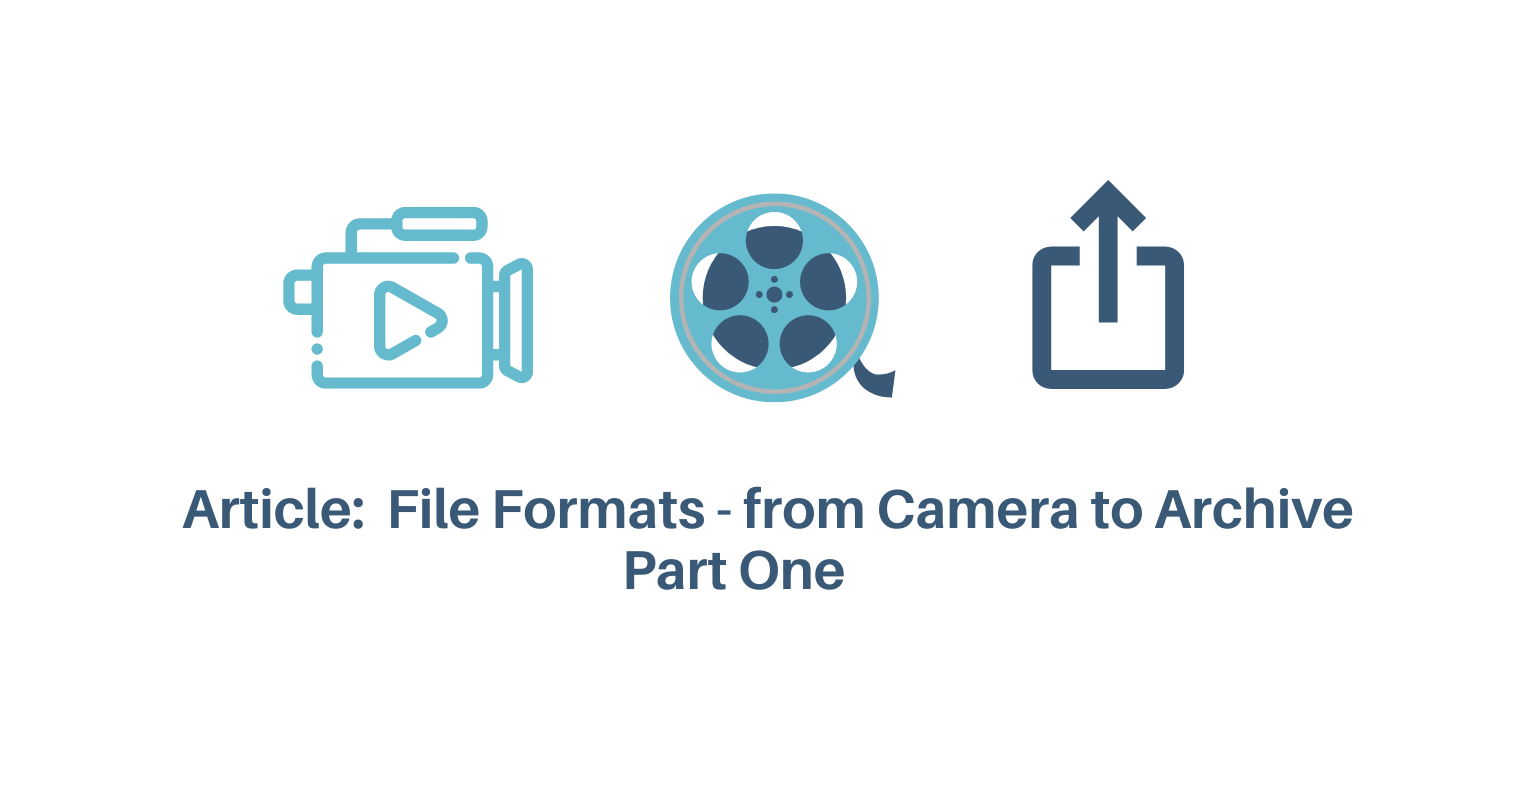 ARTICLE: VIDEO FILE FORMATS FROM CAMERA TO ARCHIVE - PART ONE